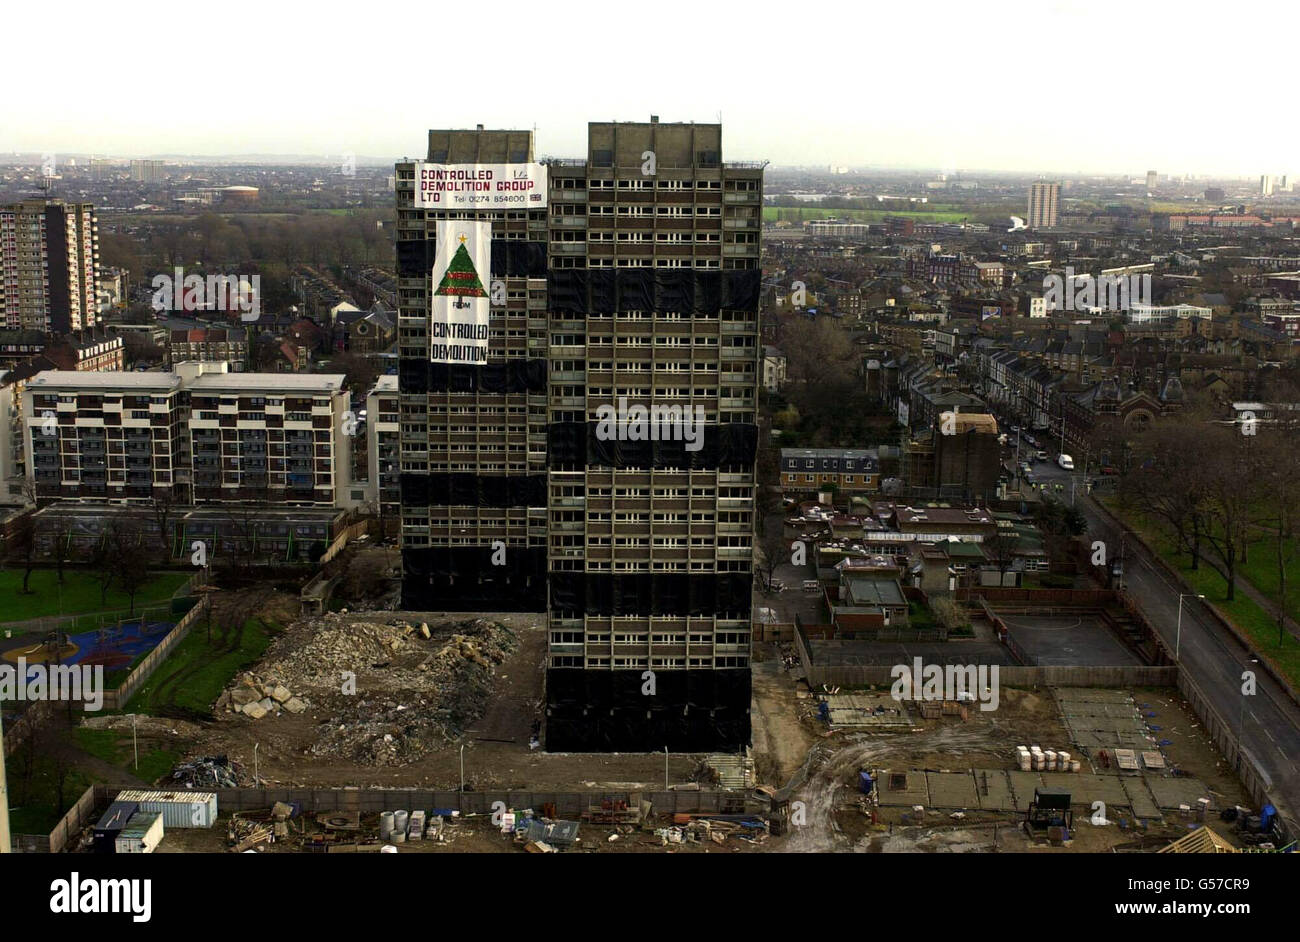 Sutherland and Embley points, two 22 storey tower blocks on the Nightingale Estate, Hackney, east London, before they were blown up to allow 64 housing association homes to be built on the site. Stock Photo